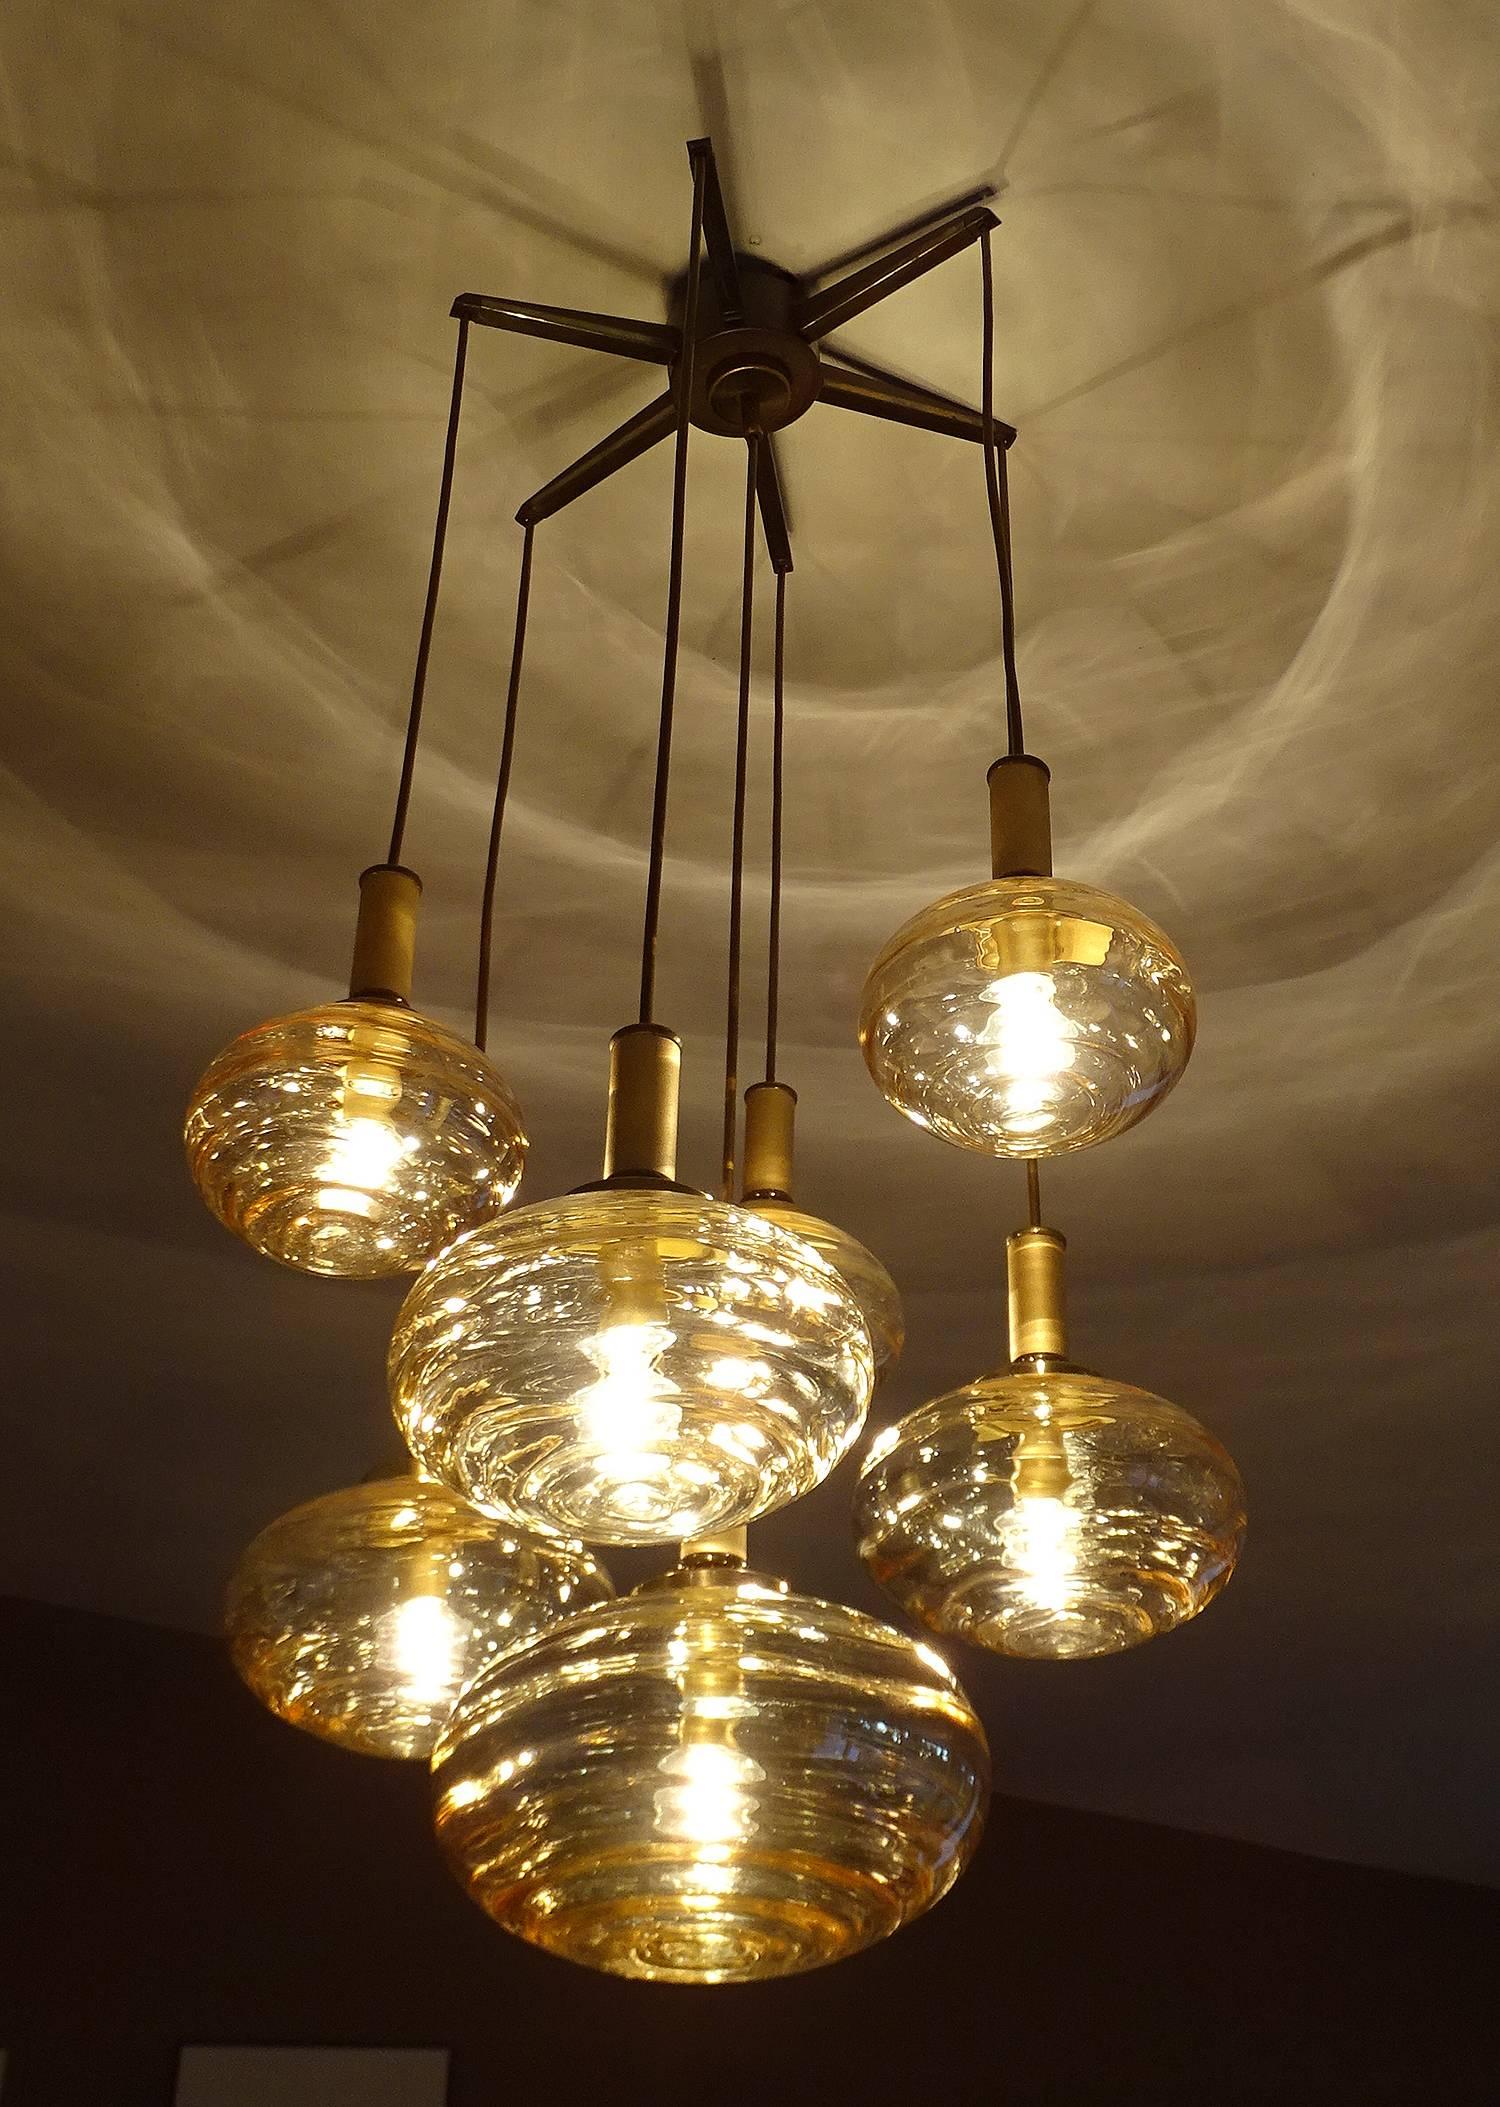 Multi-tier chandelier by Limburg featuring 7 blown glass globes with overlayered swirls, as each of the globes were handcrafted, their surface structure can differ, great lighting and shadows effect when lit up.
40.16 in. / 102 cm H (cables can be